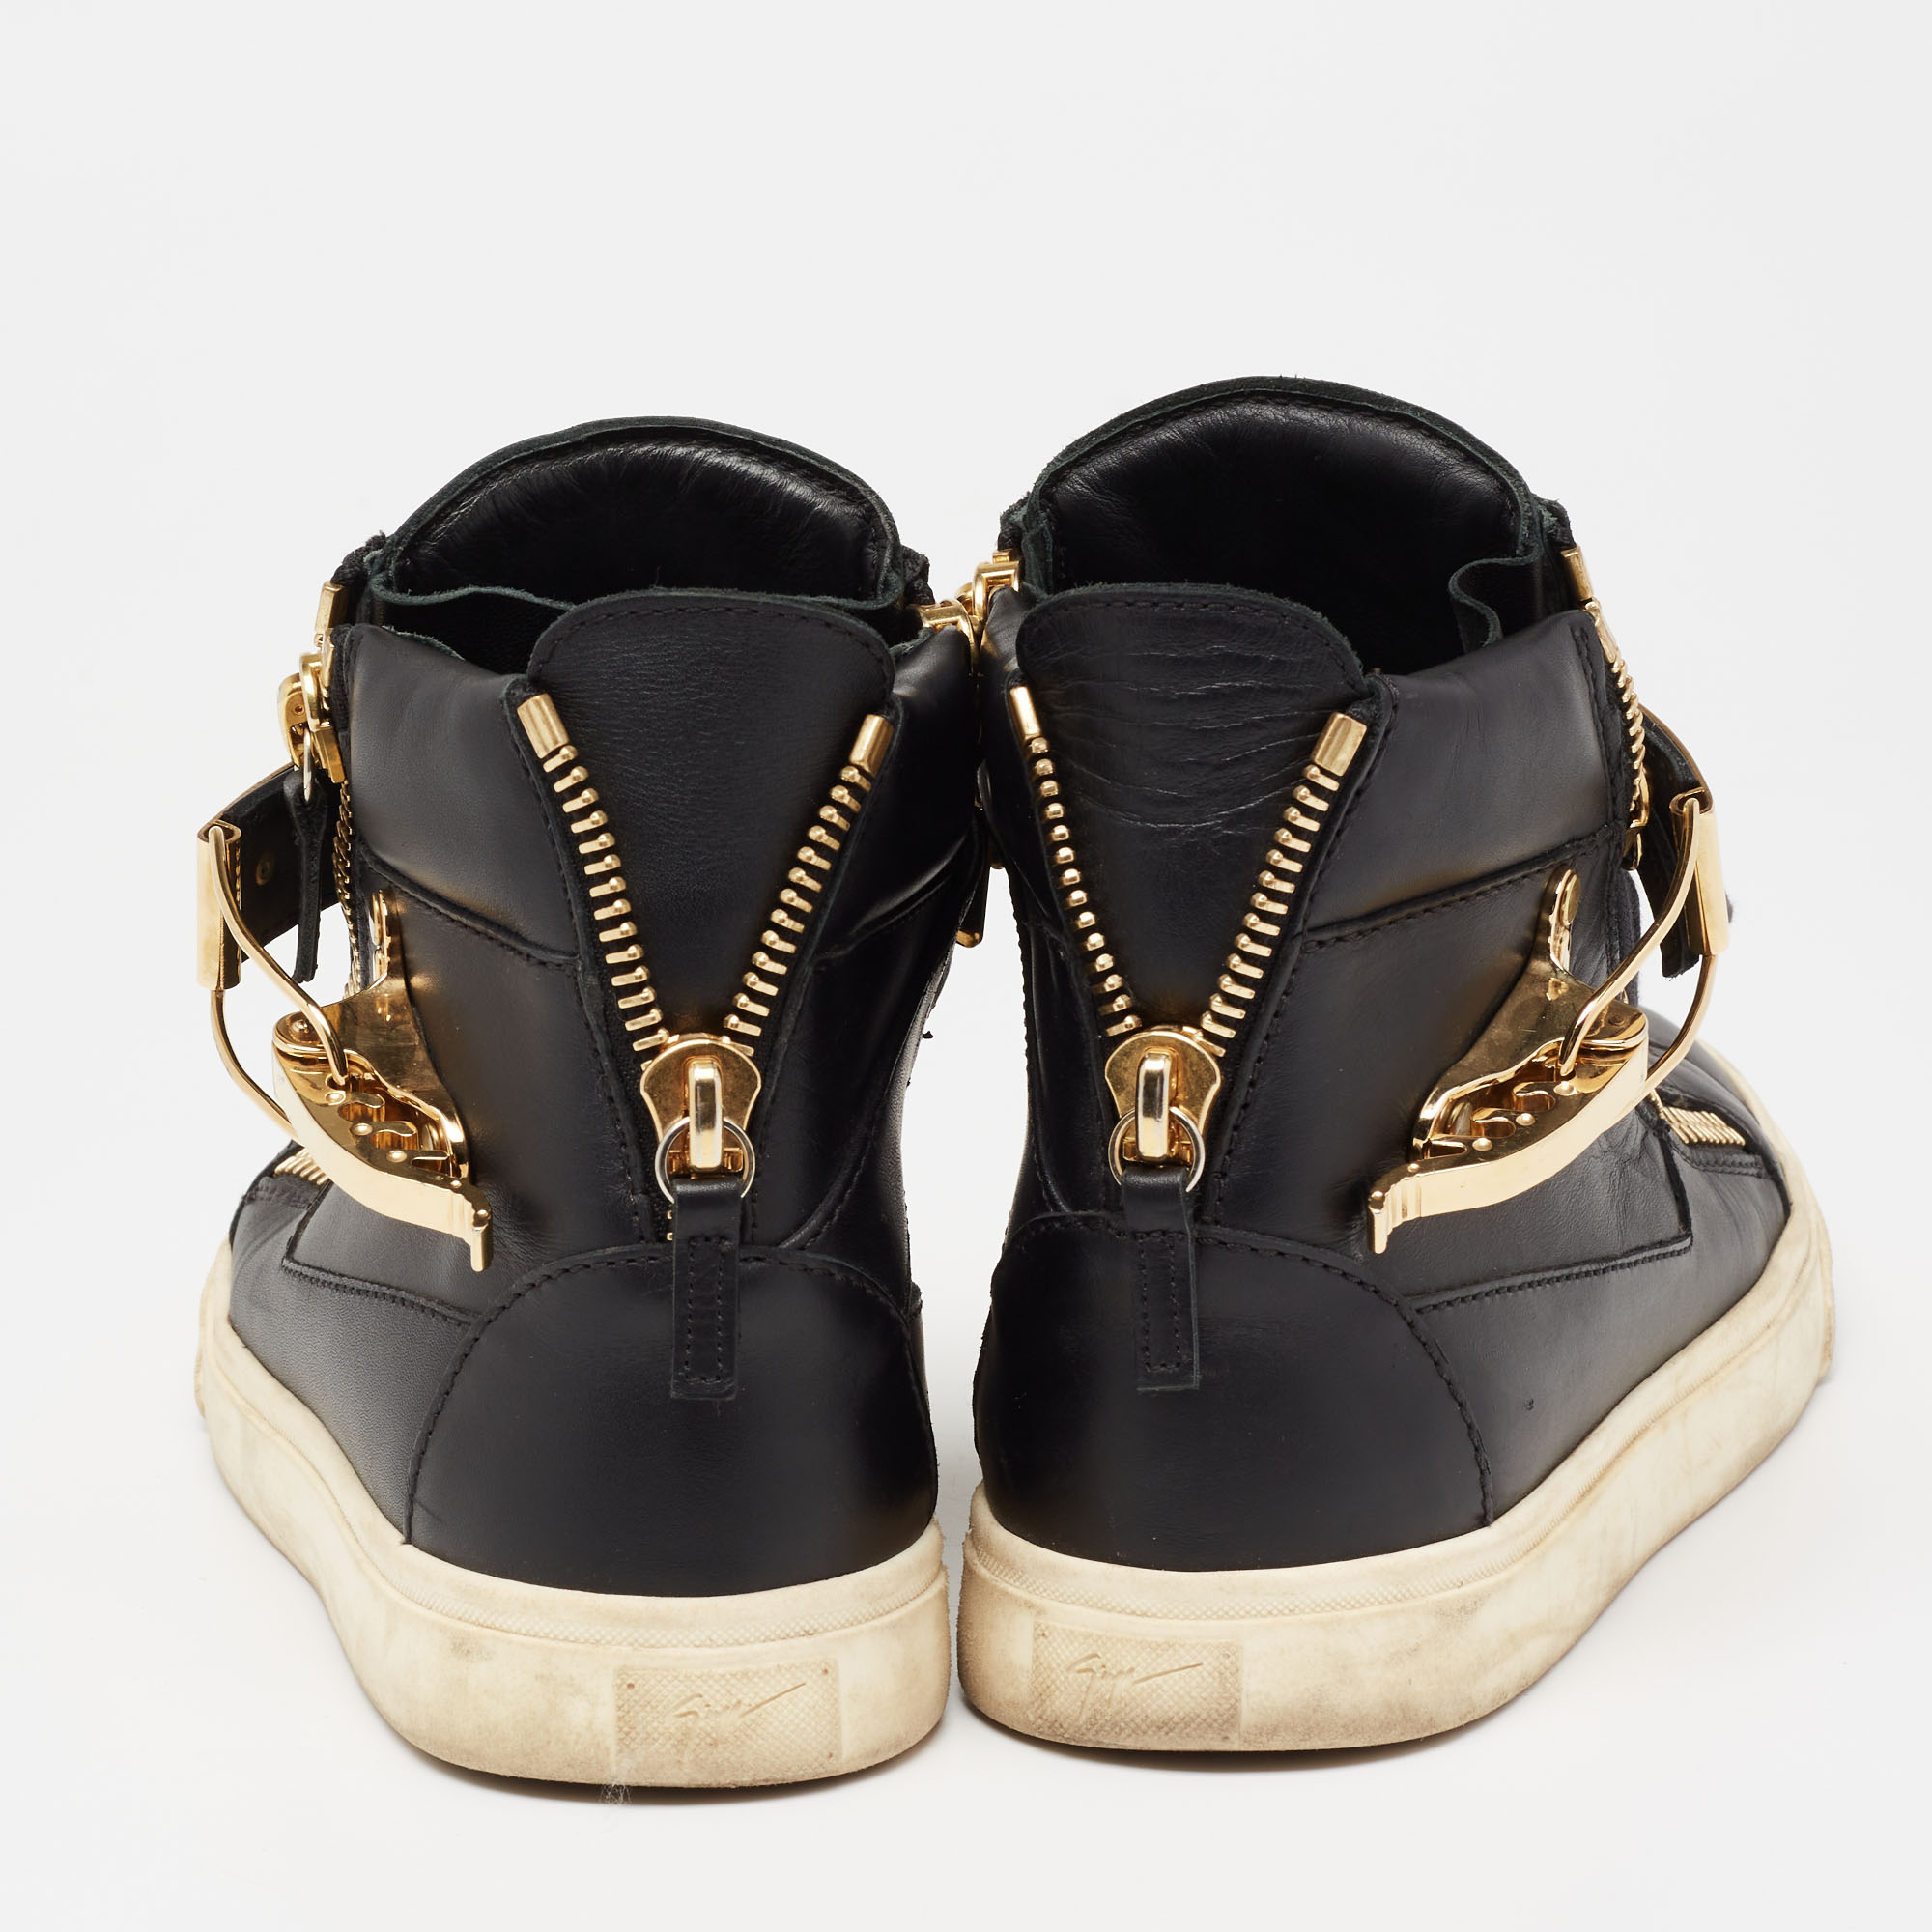 Giuseppe Zanotti Black/Gold  Leather Coby High Top Sneakers Size 37